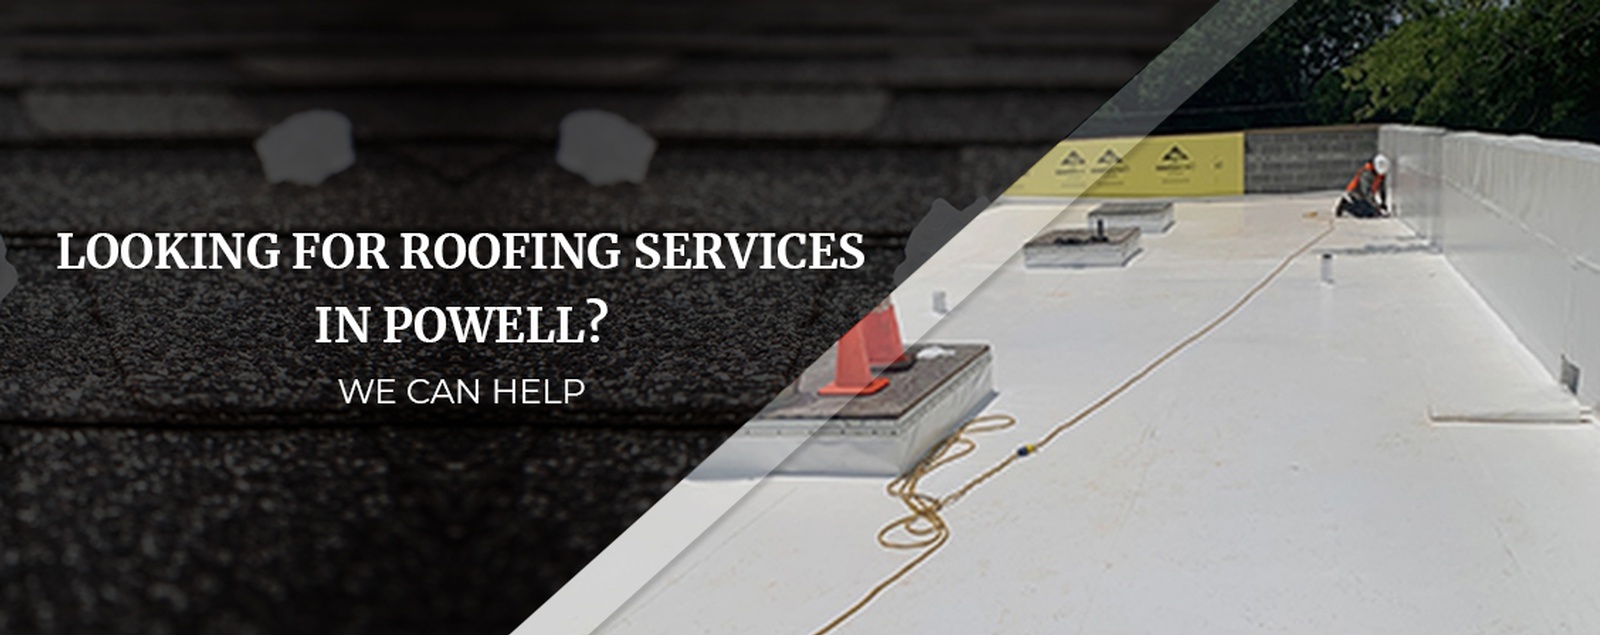 Looking For Roofing Services In Powell We Can Help